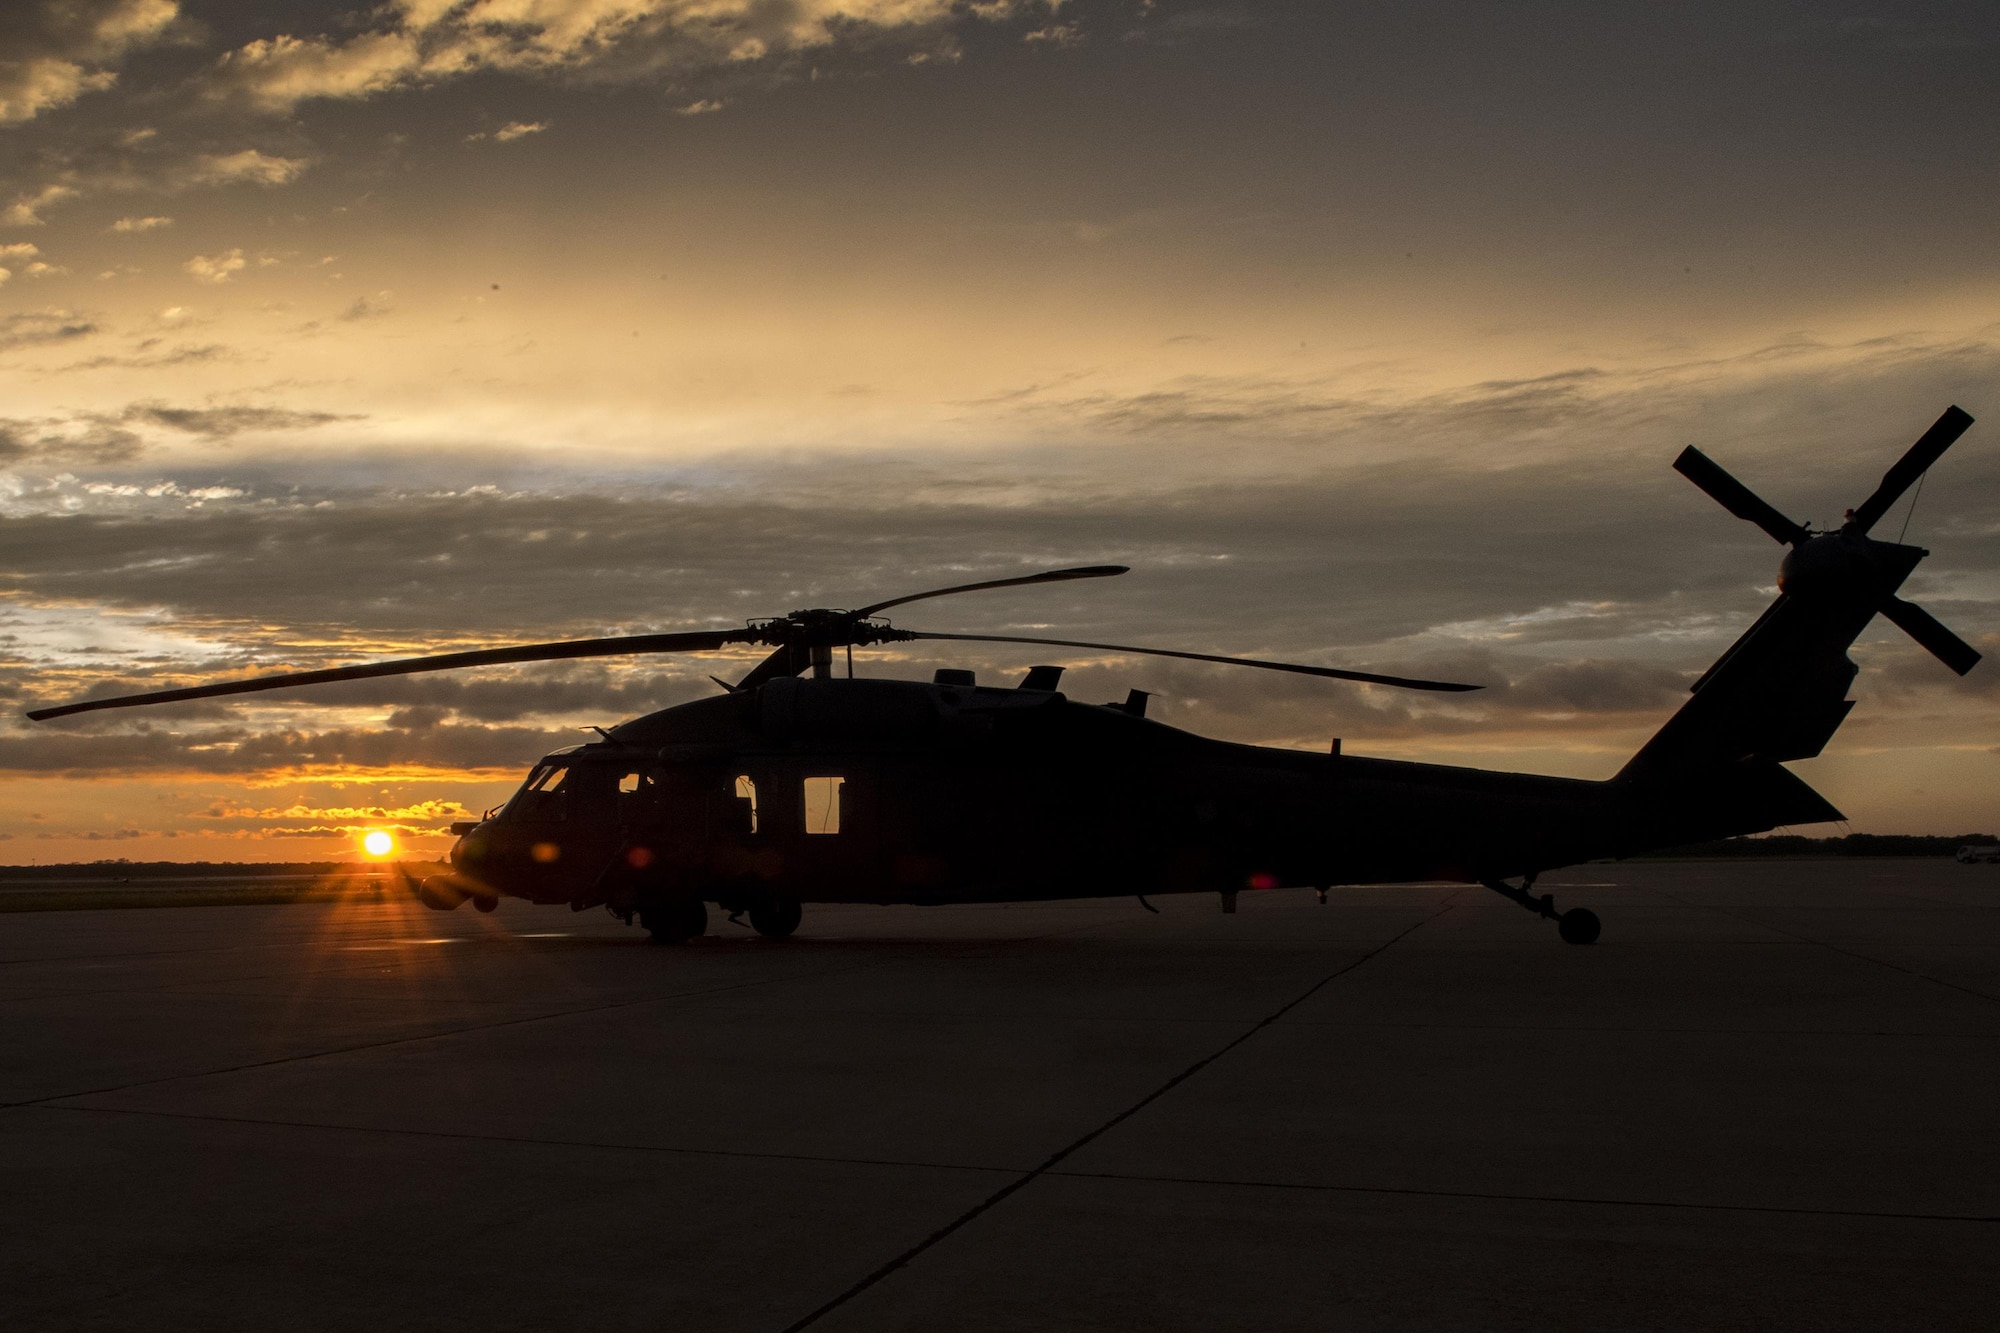 An HH-60G Pave Hawk rests on the flightline, Aug. 28, 2017, at Easterwood Airport in College Station, Texas. The 347th Rescue Group from Moody Air Force Base, Ga. sent aircraft and personnel in support of Air Forces Northern as part of Northern Command's support of FEMA's disaster response efforts. (U.S. Air Force photo by Tech. Sgt. Zachary Wolf)